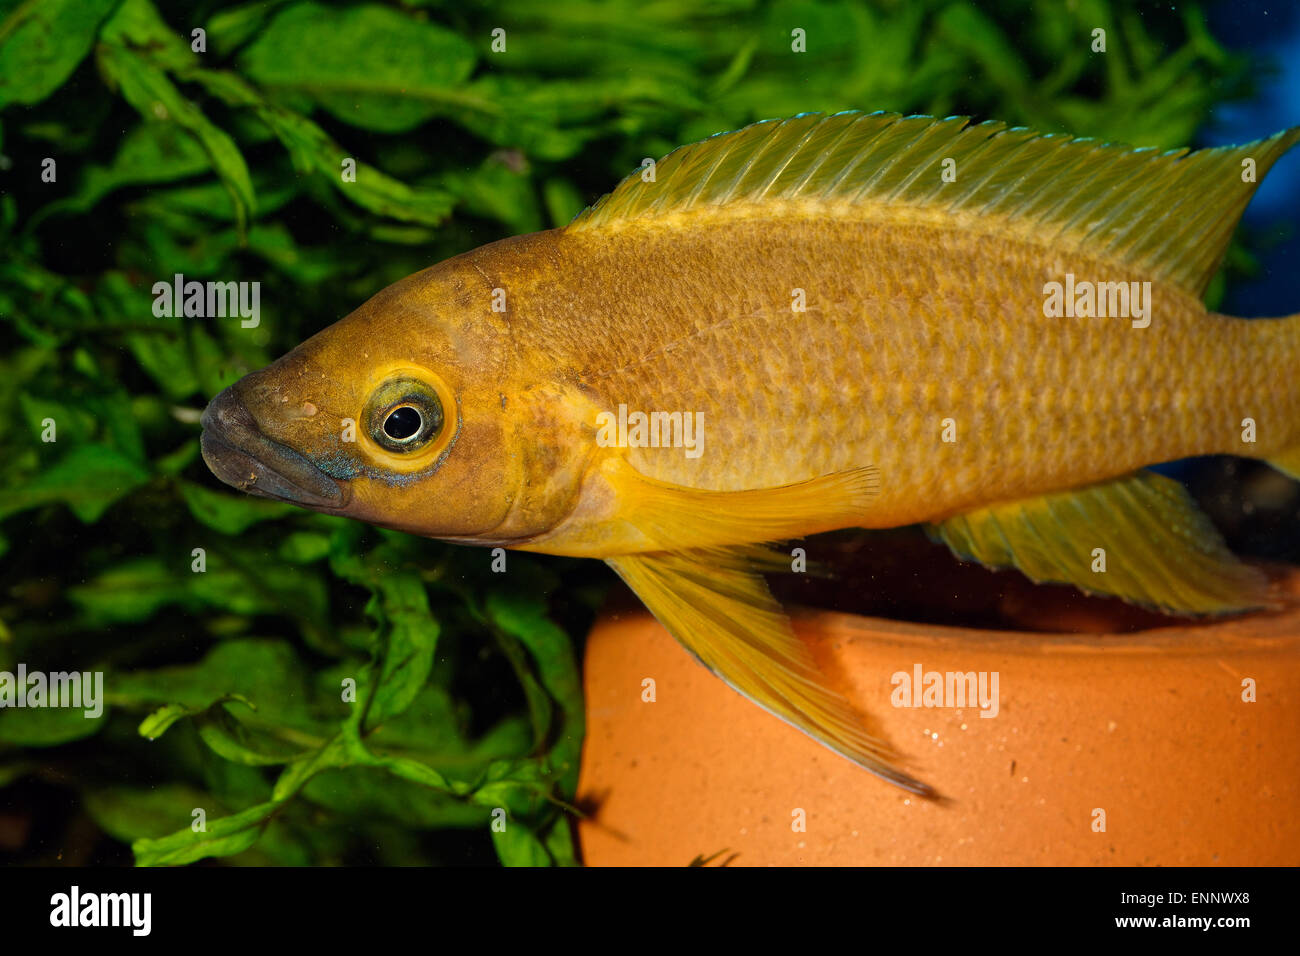 Nice yellow cichlid fish from genus Neolamprologus. Stock Photo